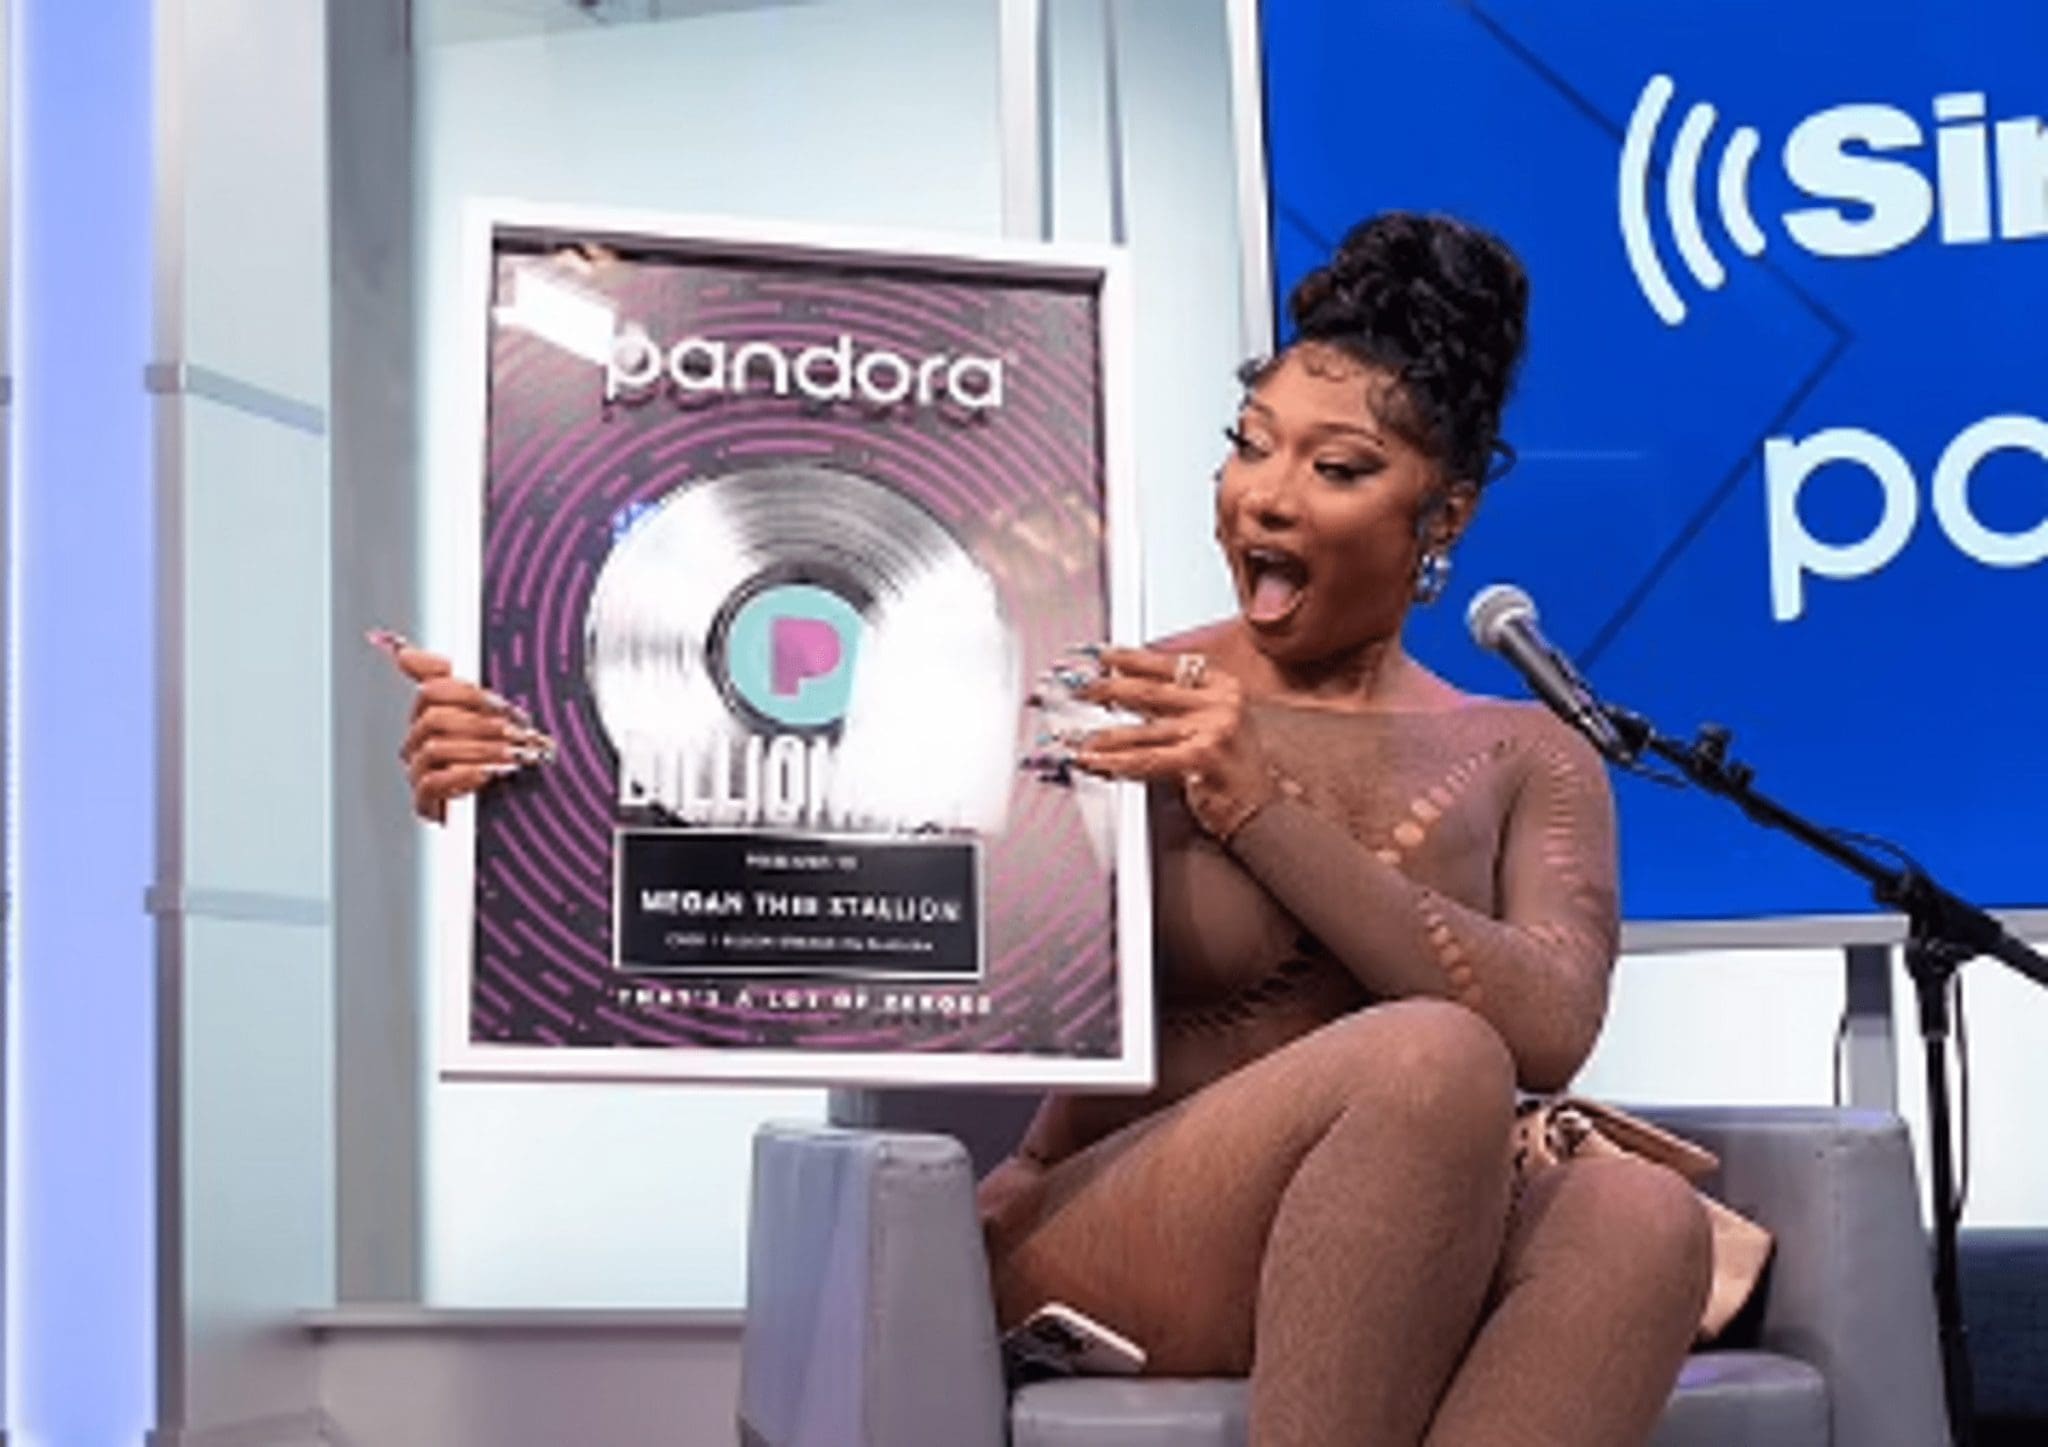 While Visiting Sirius XM W, Megan Thee Stallion Displayed Her Curves In A Transparent Catsuit